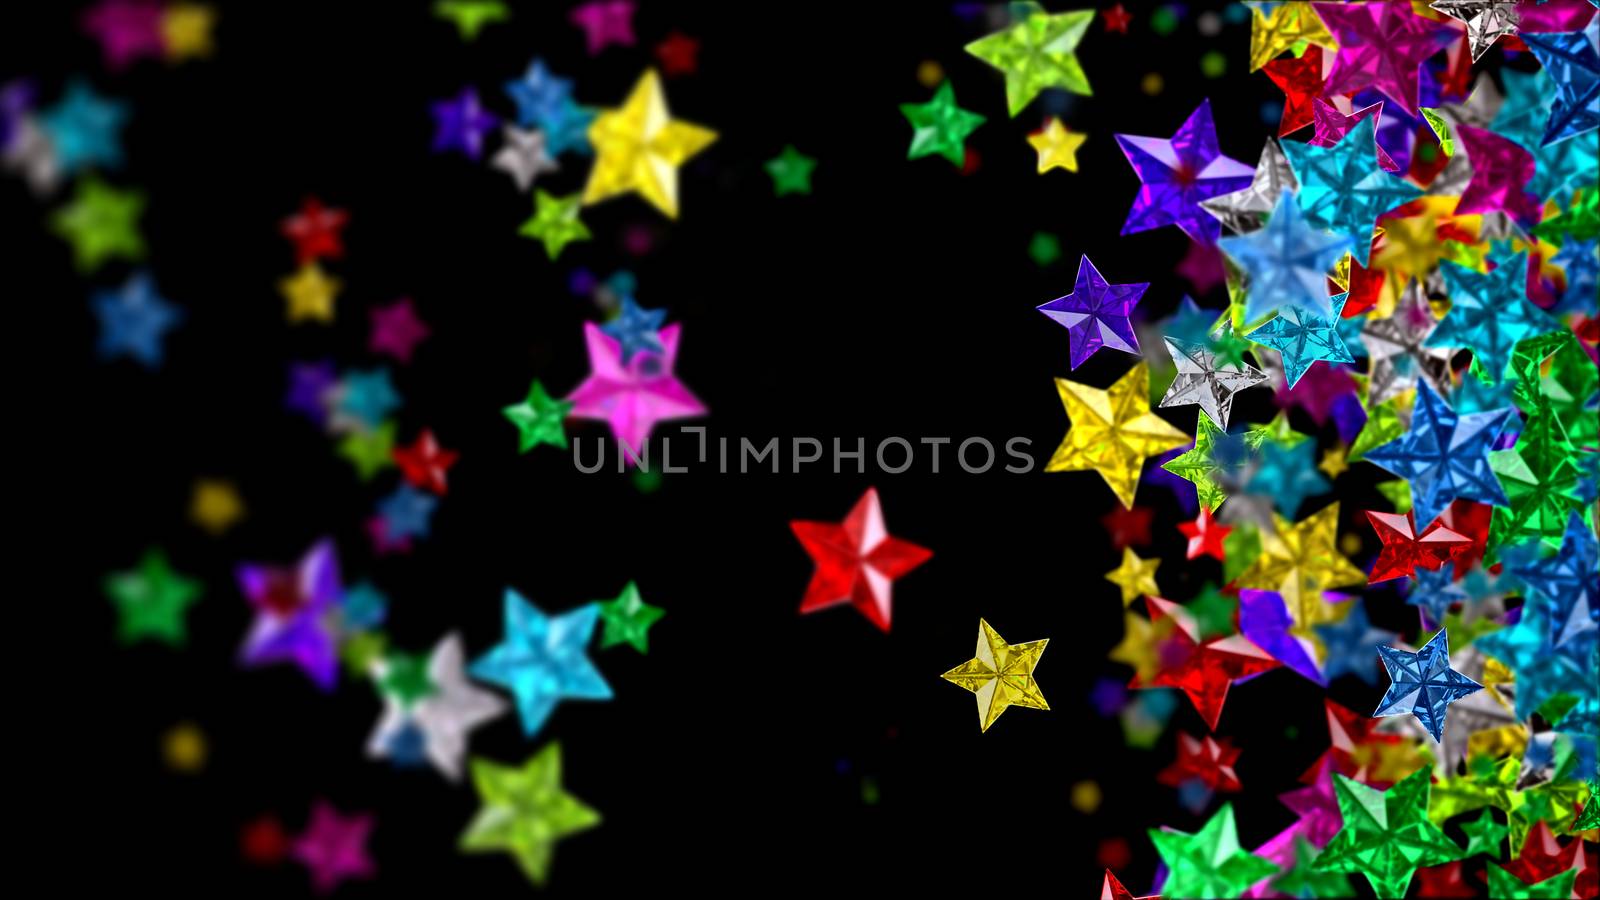 Glistening colourful glossy glass stars on the dark backdrop for any celebration or festive background, looks as luxury brilliants, rubies, sapphires and other gems